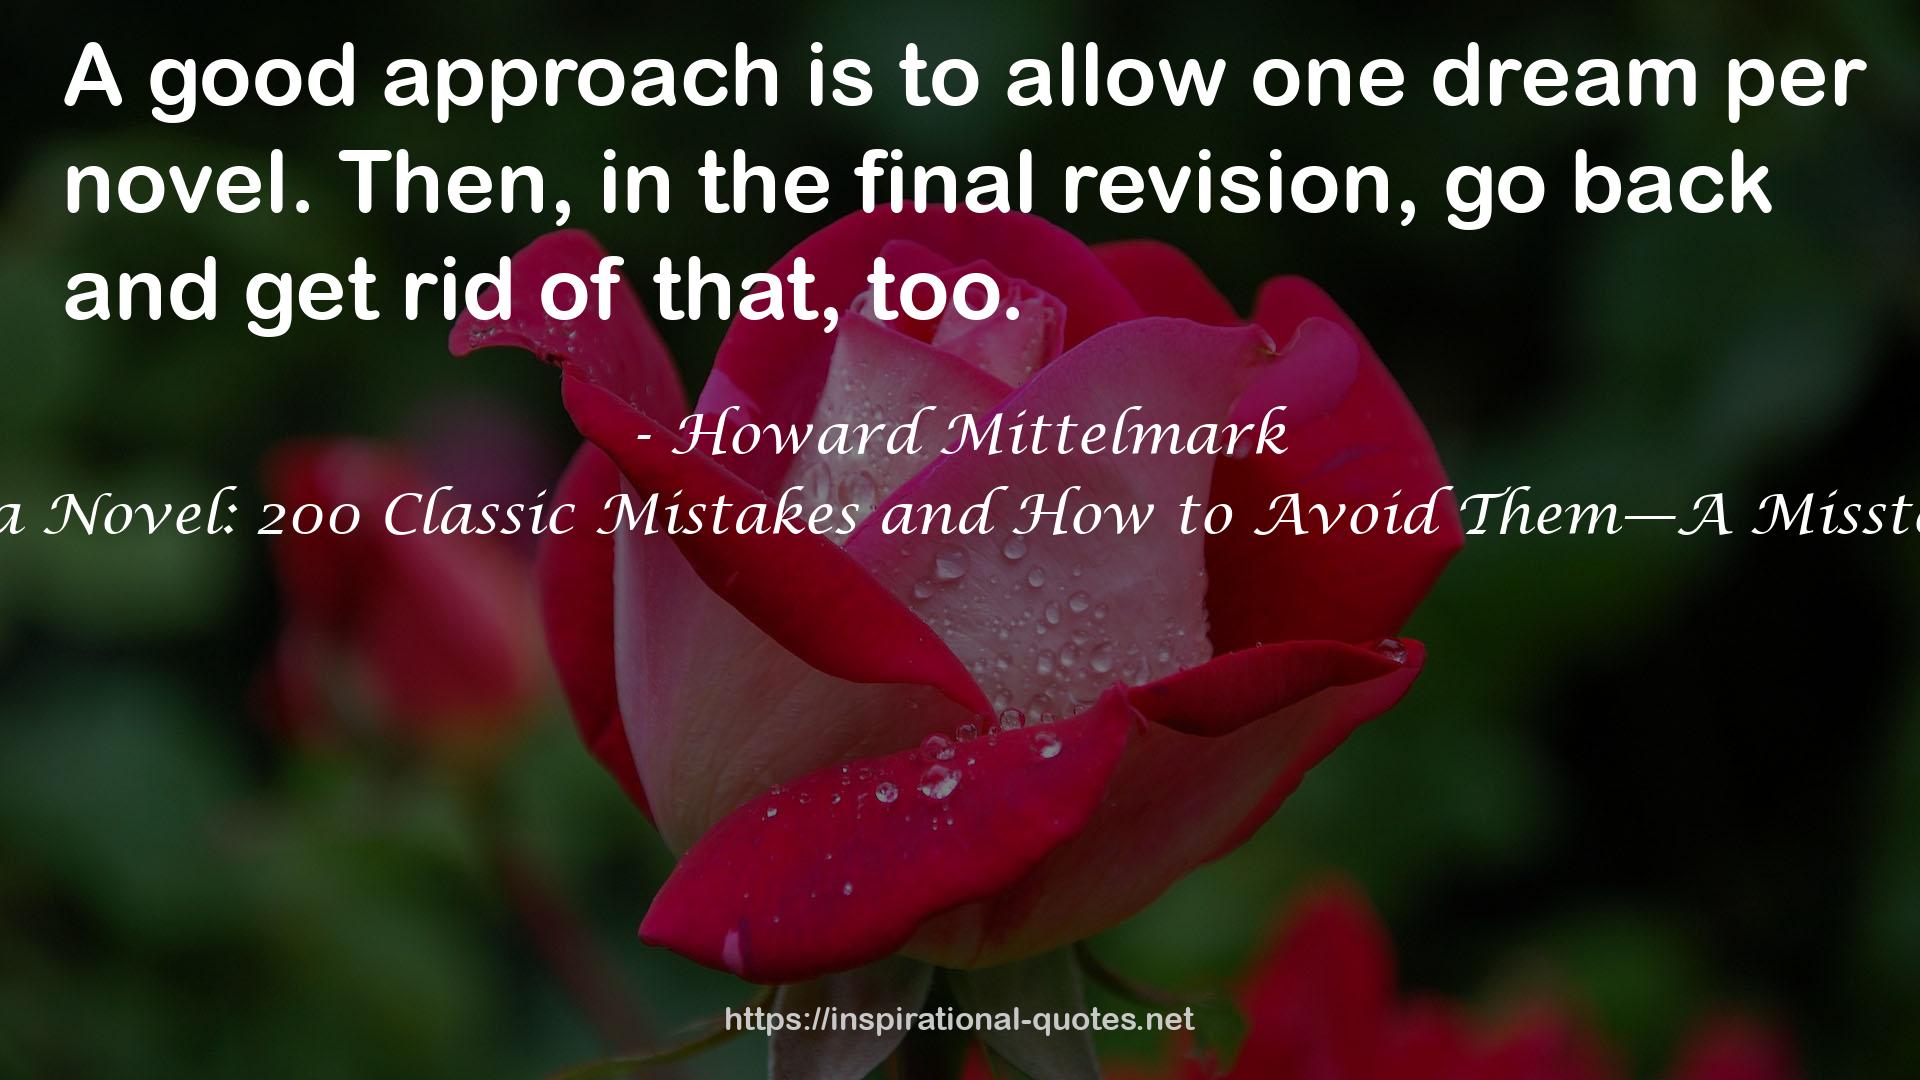 How Not to Write a Novel: 200 Classic Mistakes and How to Avoid Them—A Misstep-by-Misstep Guide QUOTES